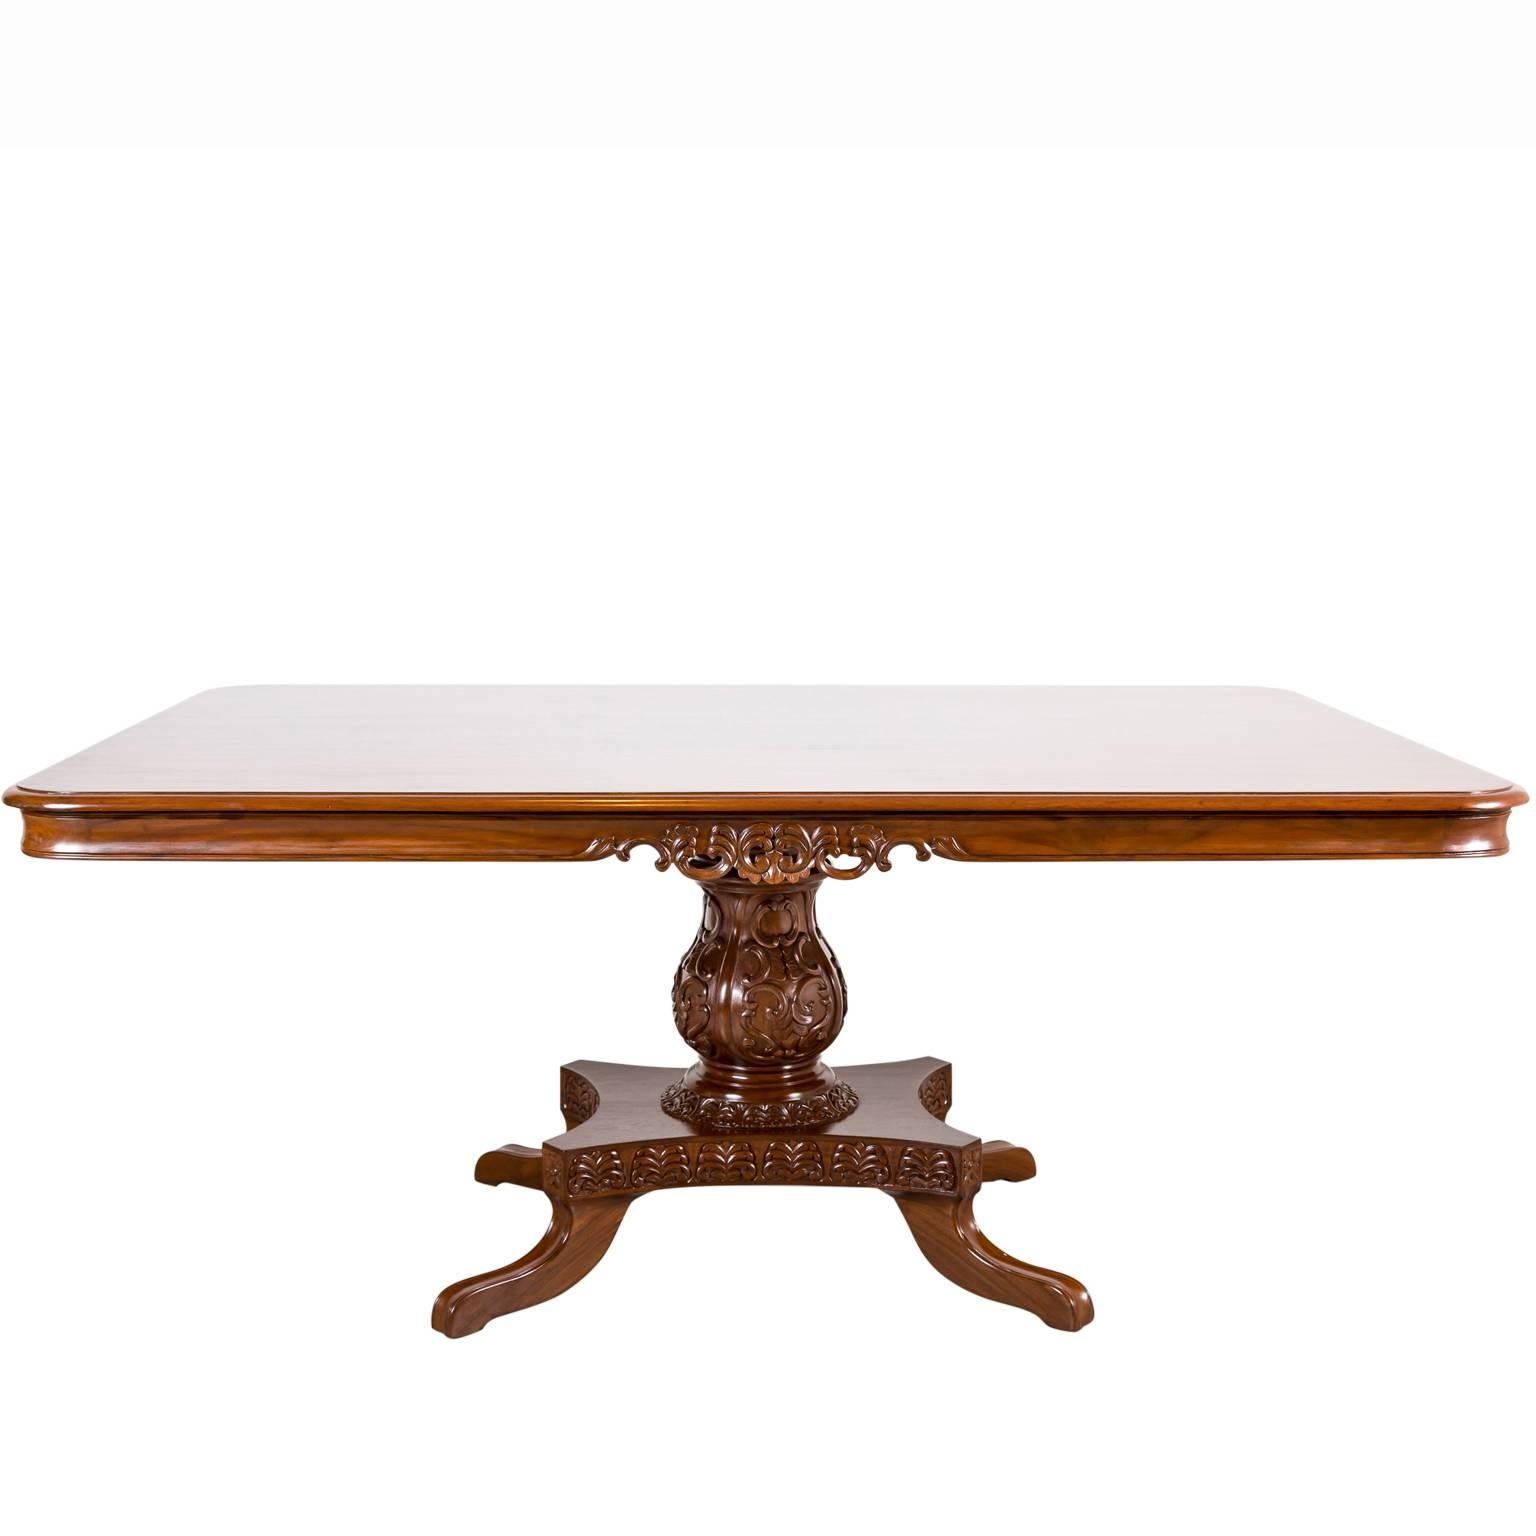 Antique Anglo-Indian or British Colonial Teak Wood Dining Table For Sale